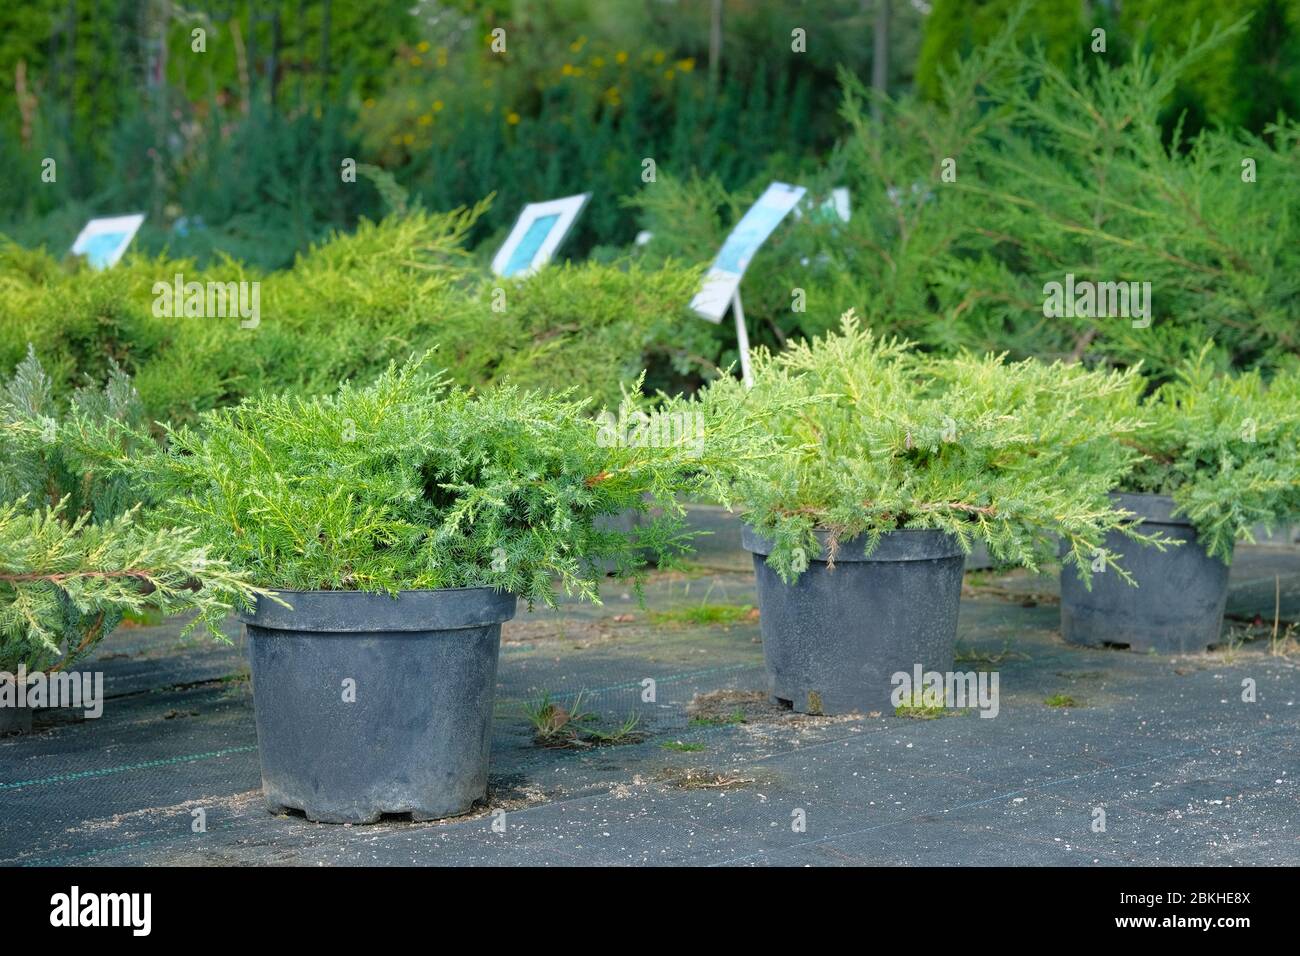 Garden shop. Bushes of green juniper in black pots offered for sale. Trees in bright colors. Stock Photo